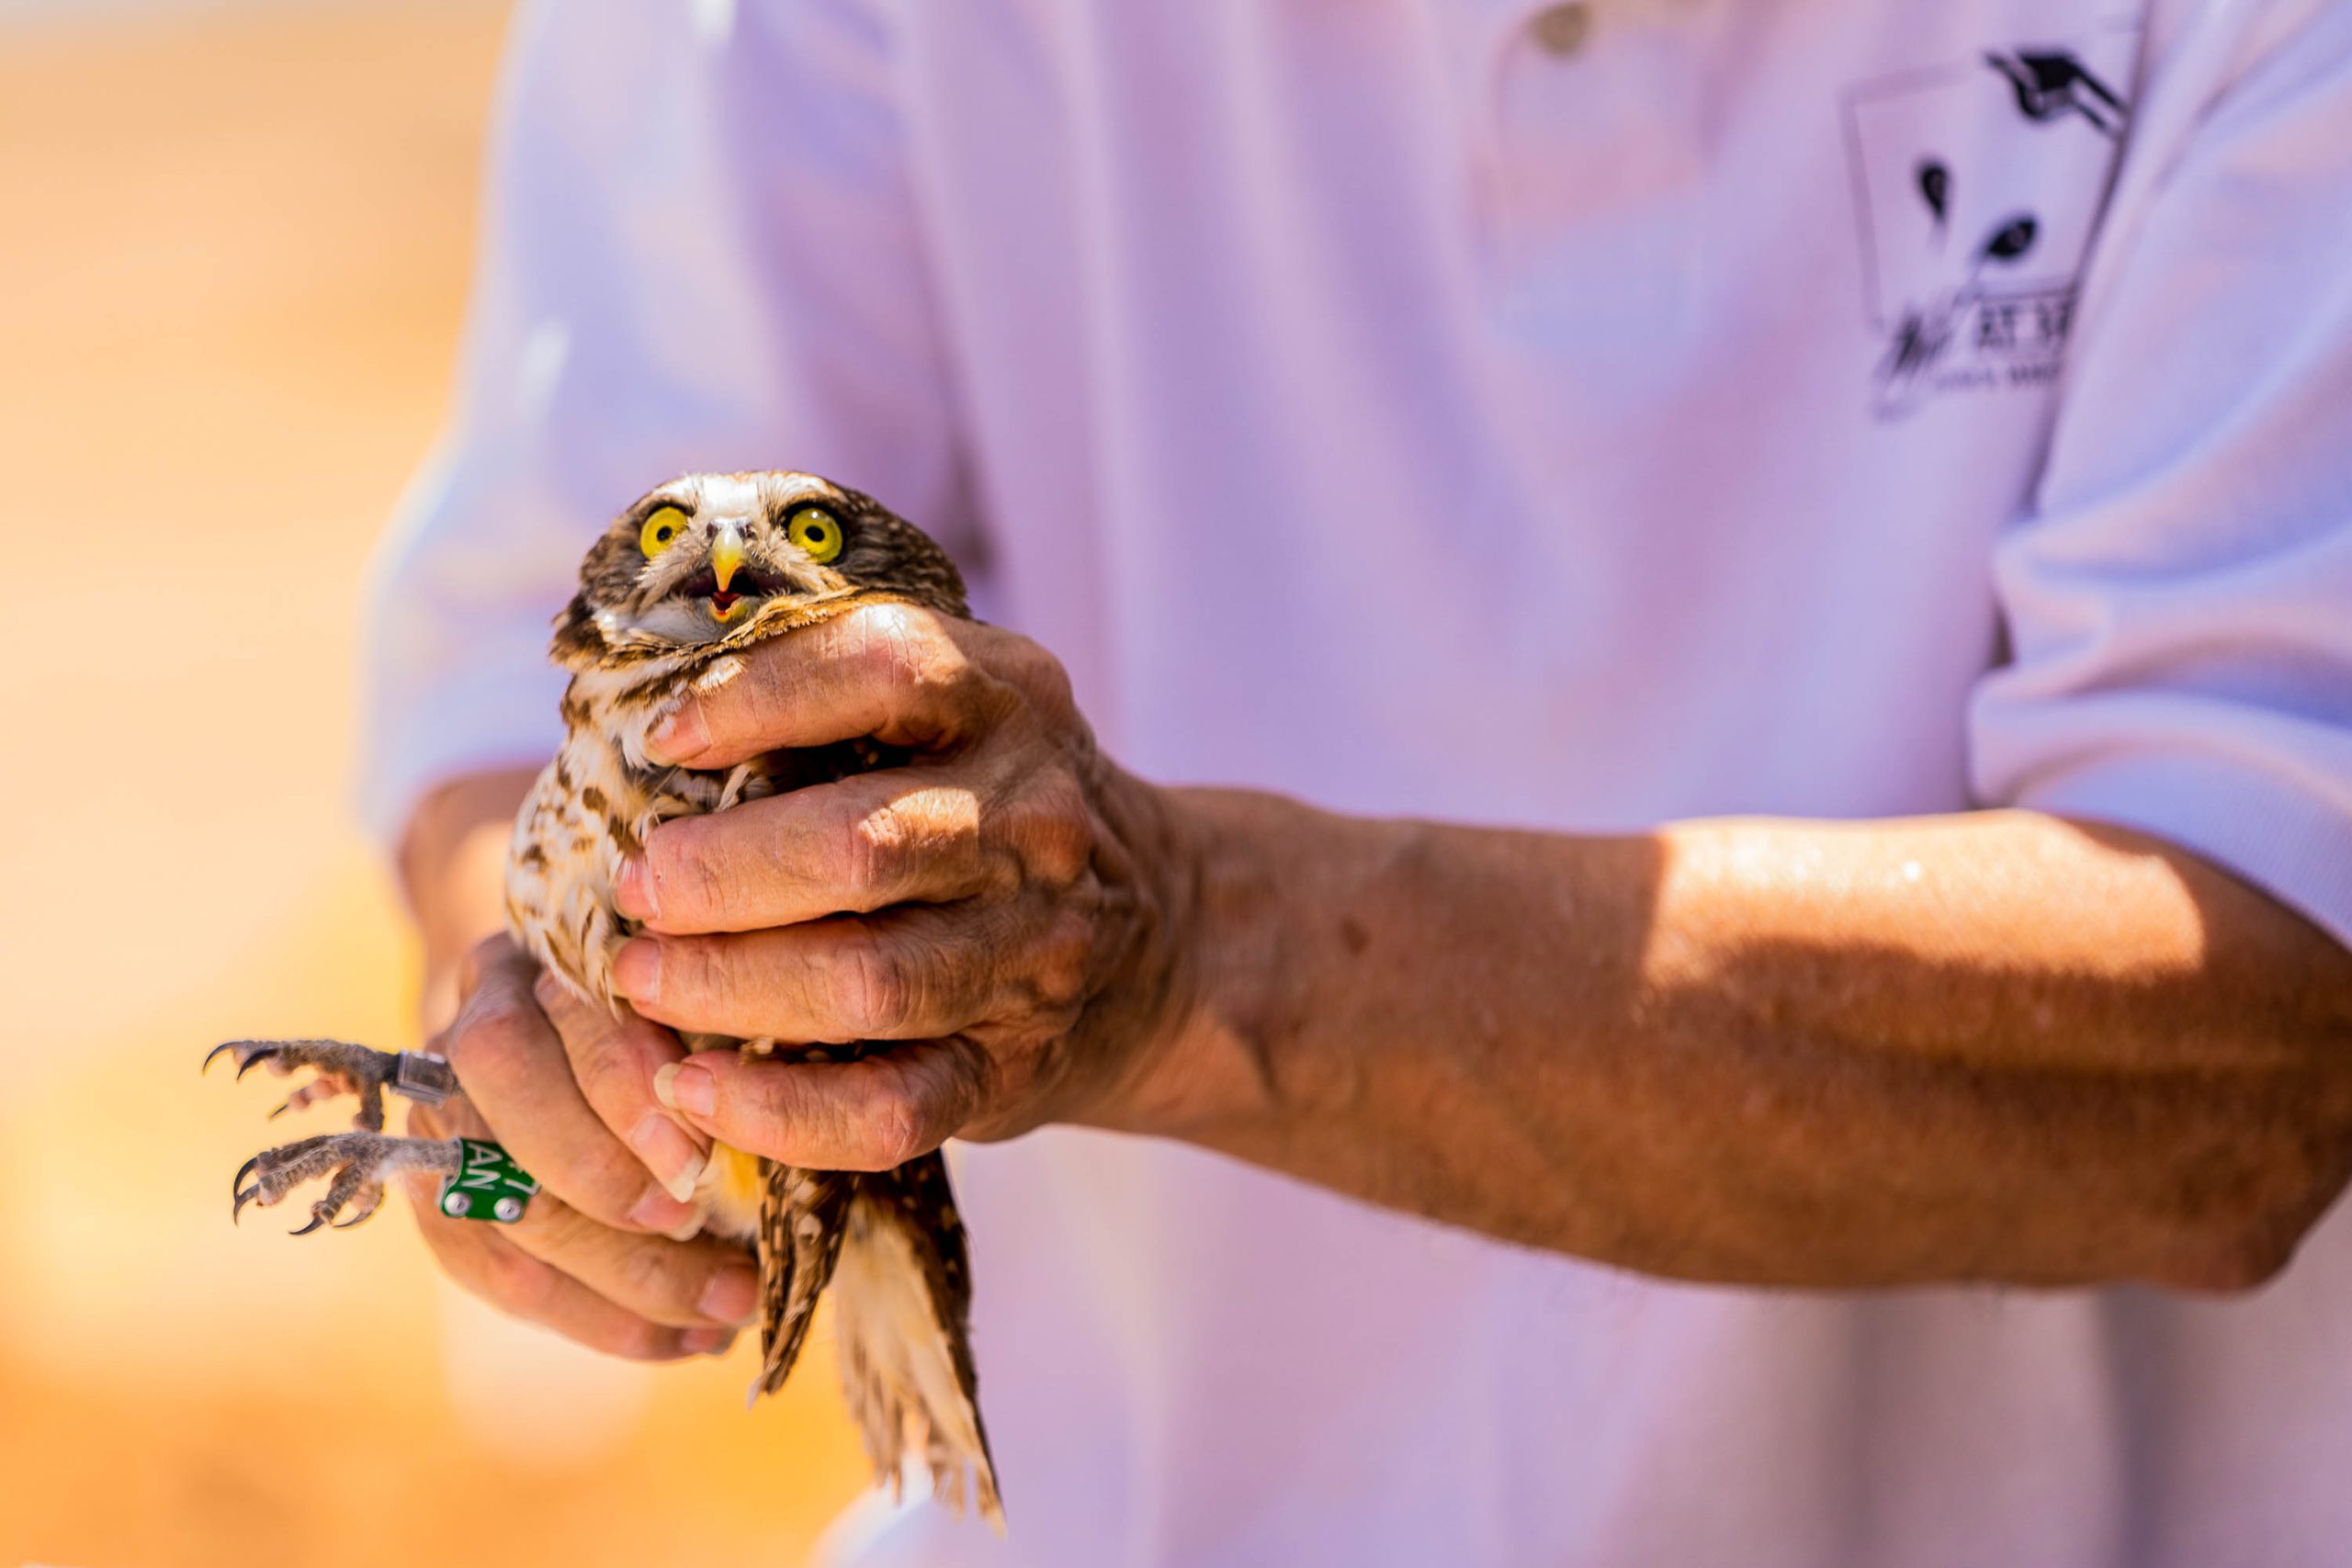 Burrowing owls’ habitat losses have wildlife experts working to relocate them